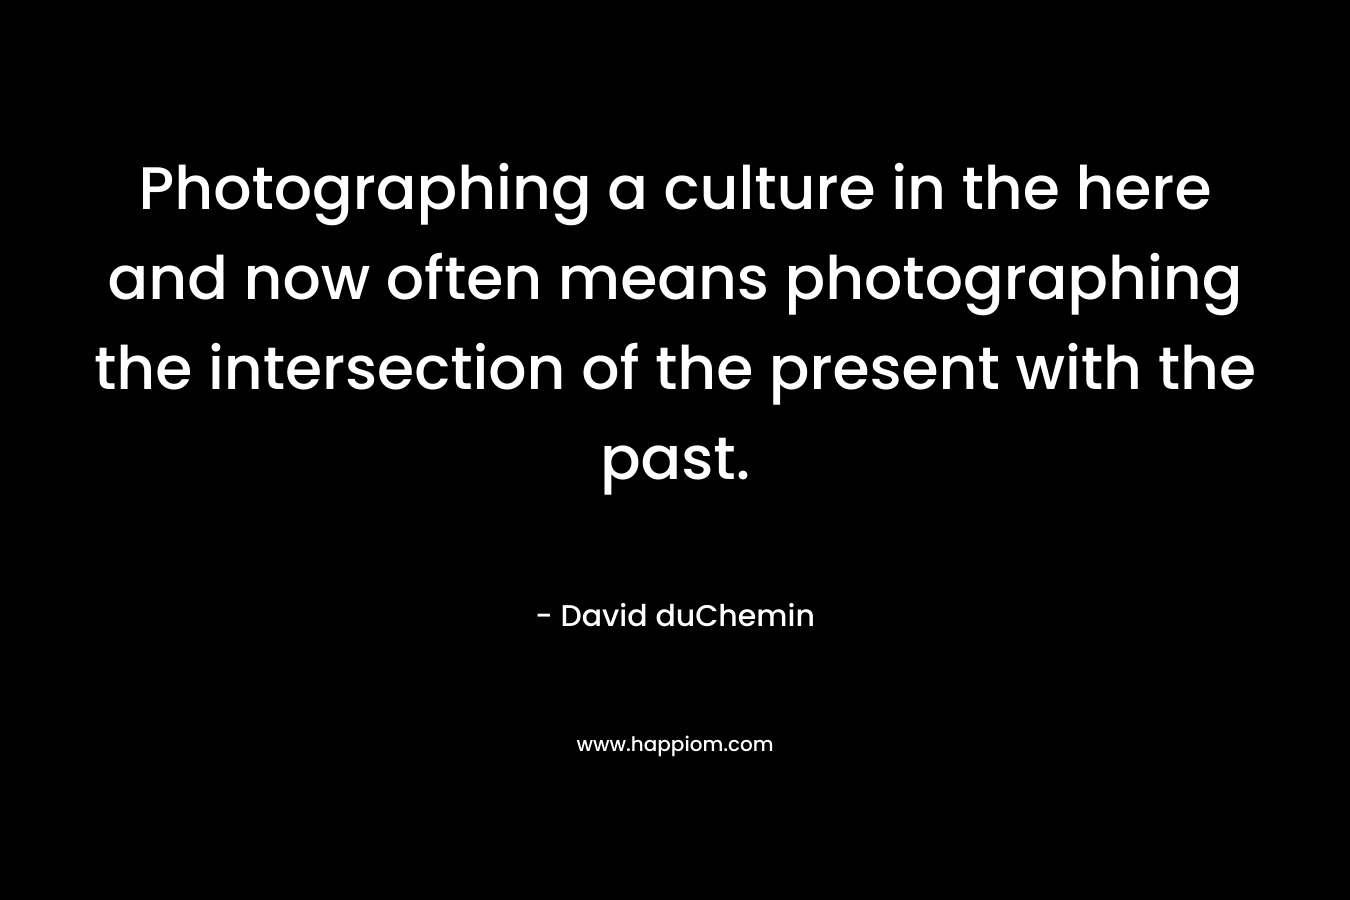 Photographing a culture in the here and now often means photographing the intersection of the present with the past.